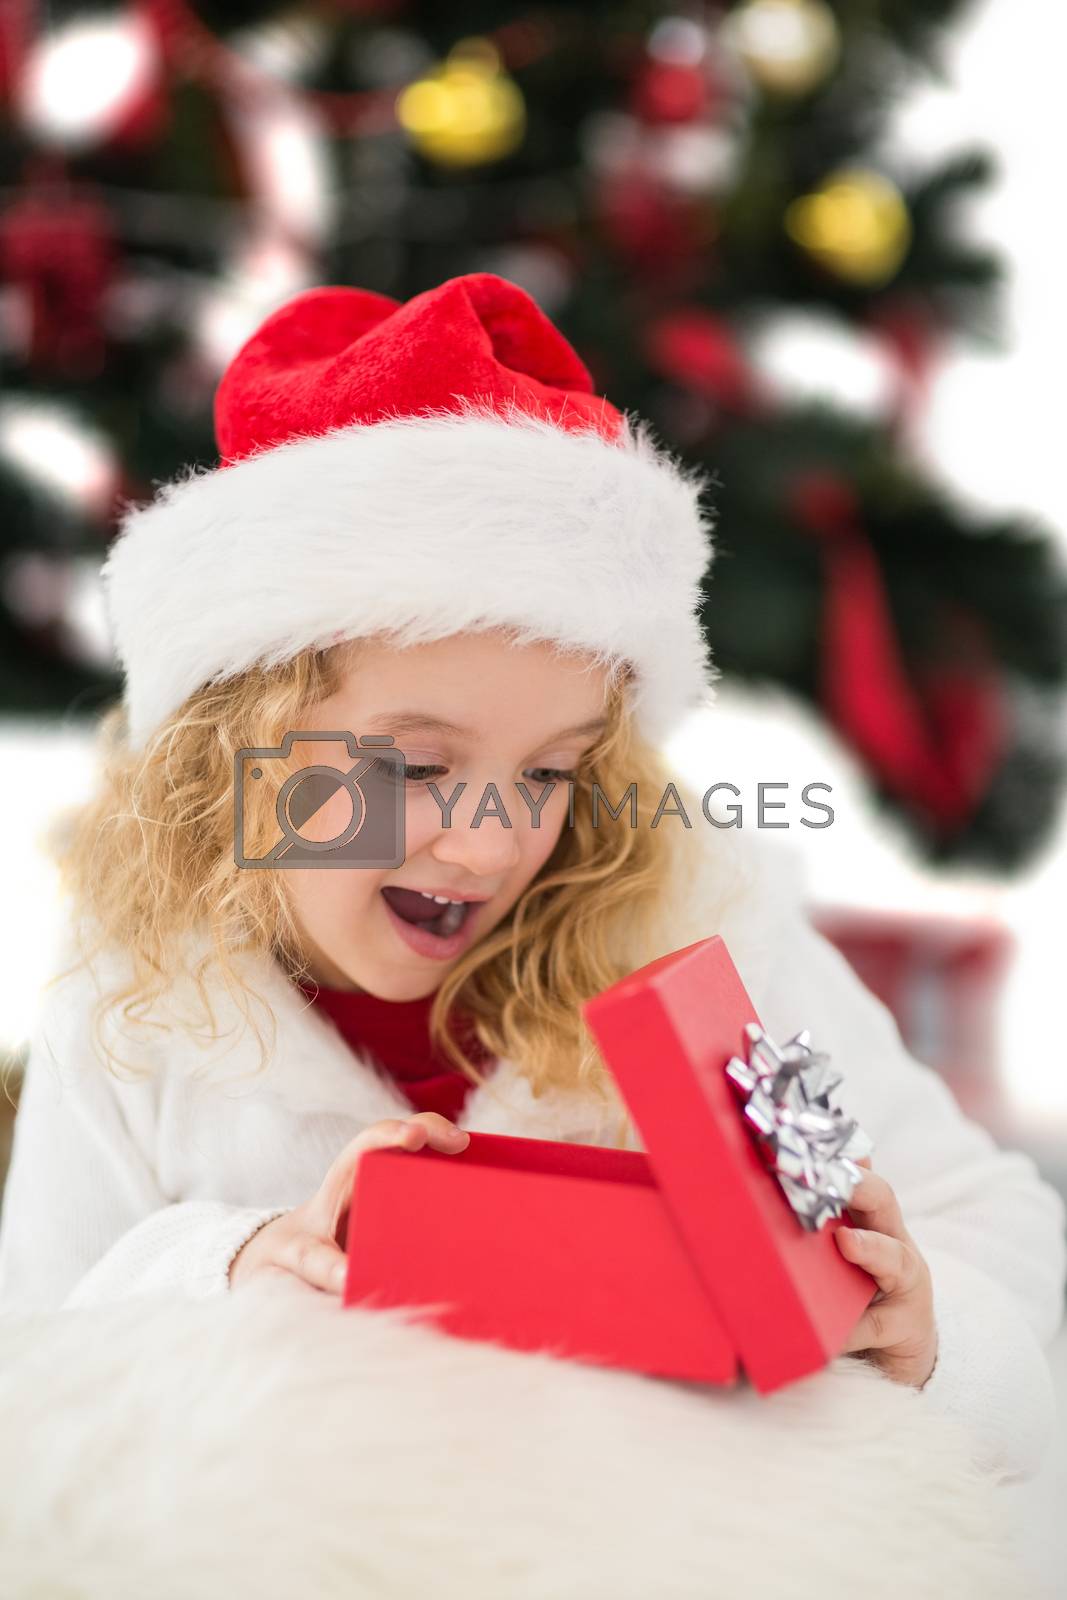 Royalty free image of Festive little girl looking at gift by Wavebreakmedia